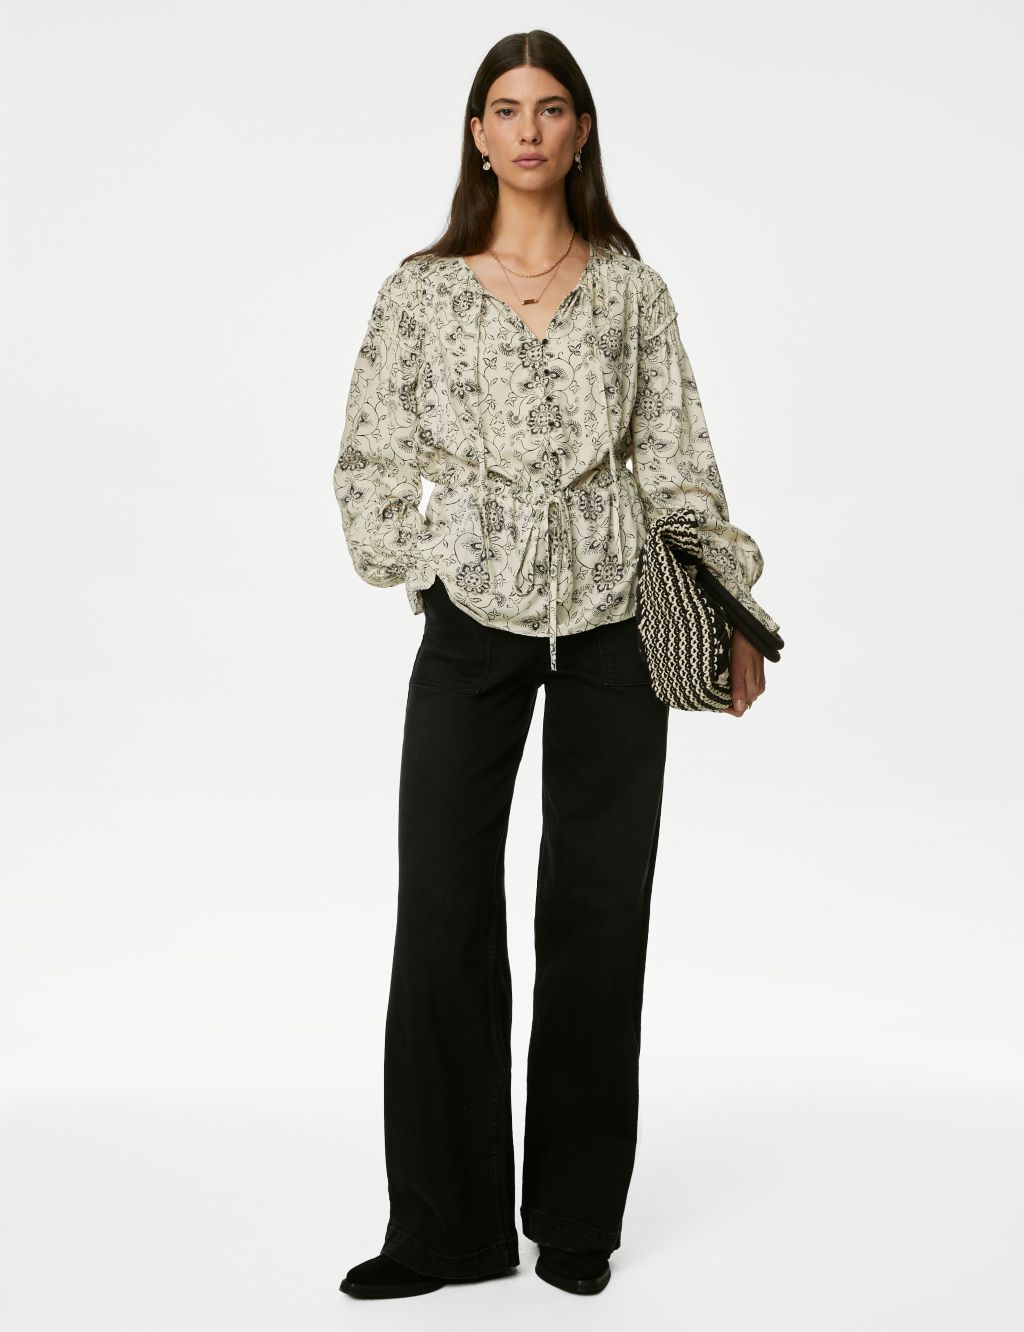 Printed Shirred Tie Neck Blouse image 1